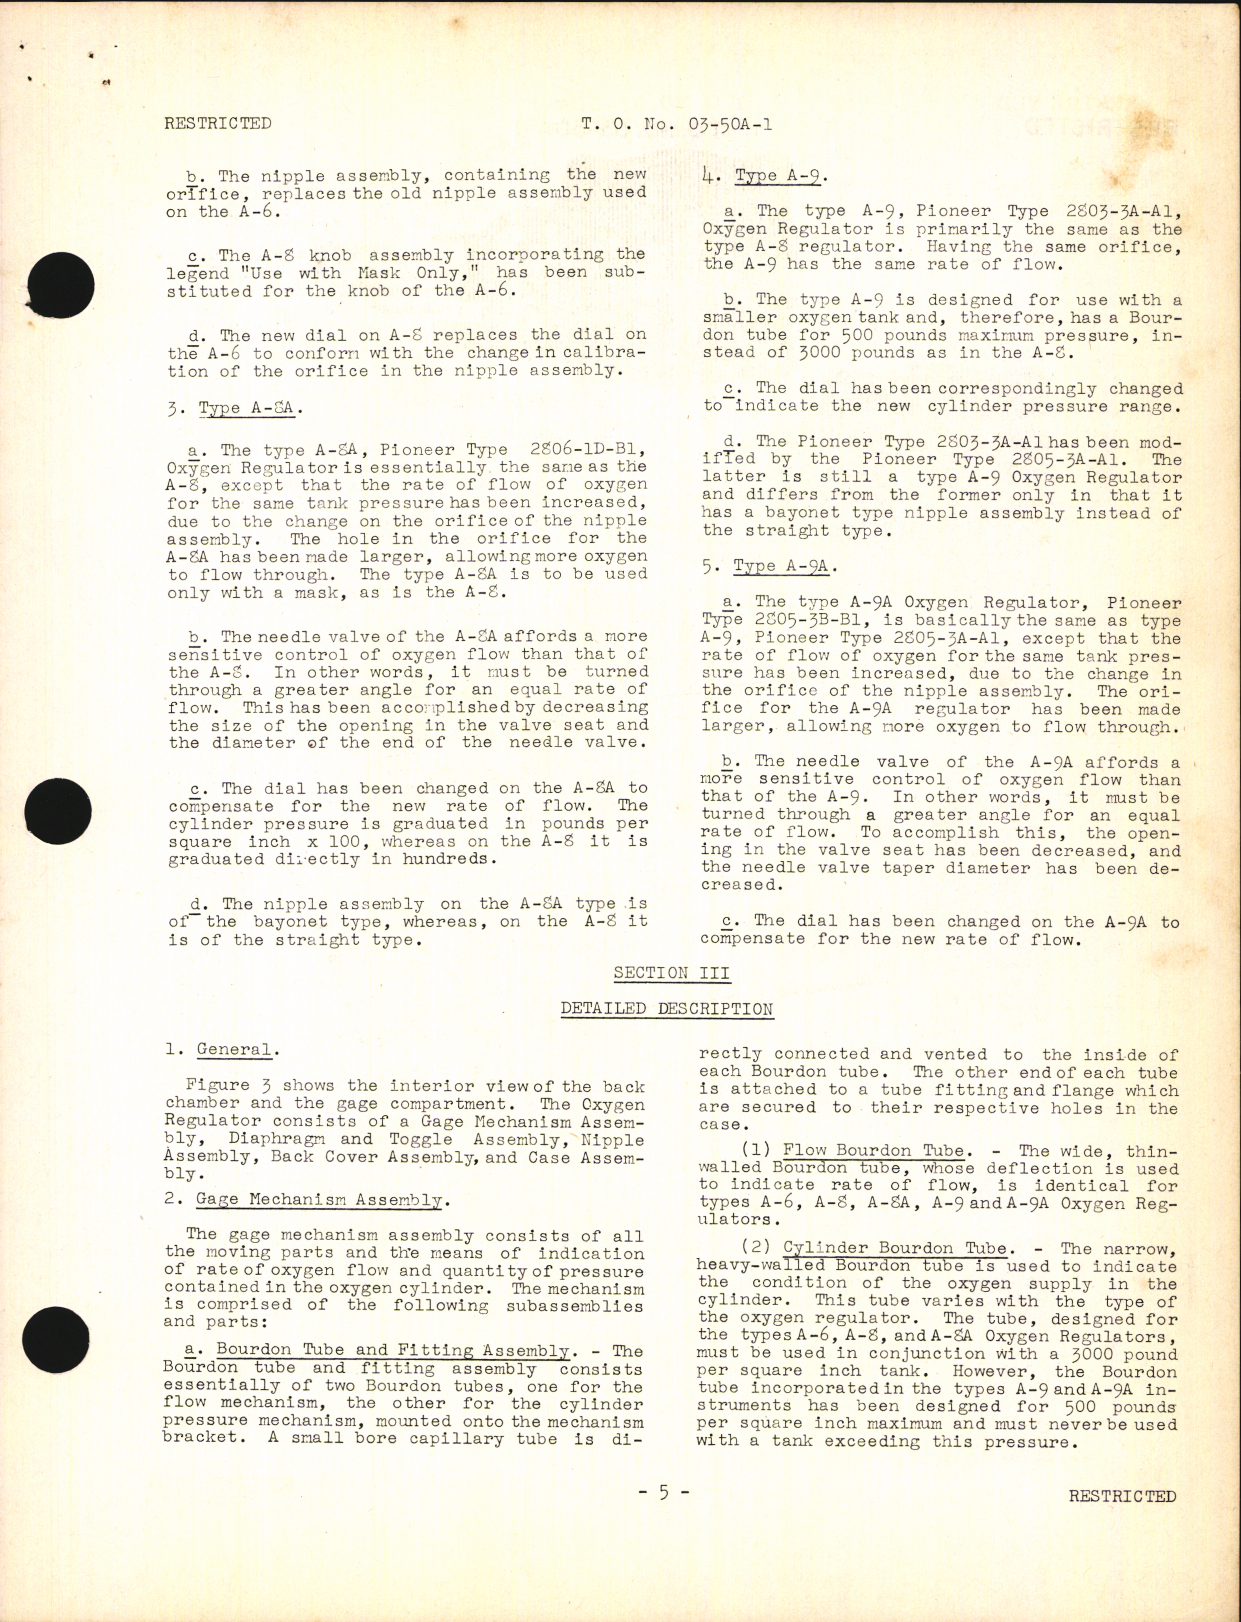 Sample page 7 from AirCorps Library document: Handbook of Instructions with Parts Catalog for Oxygen Regulators